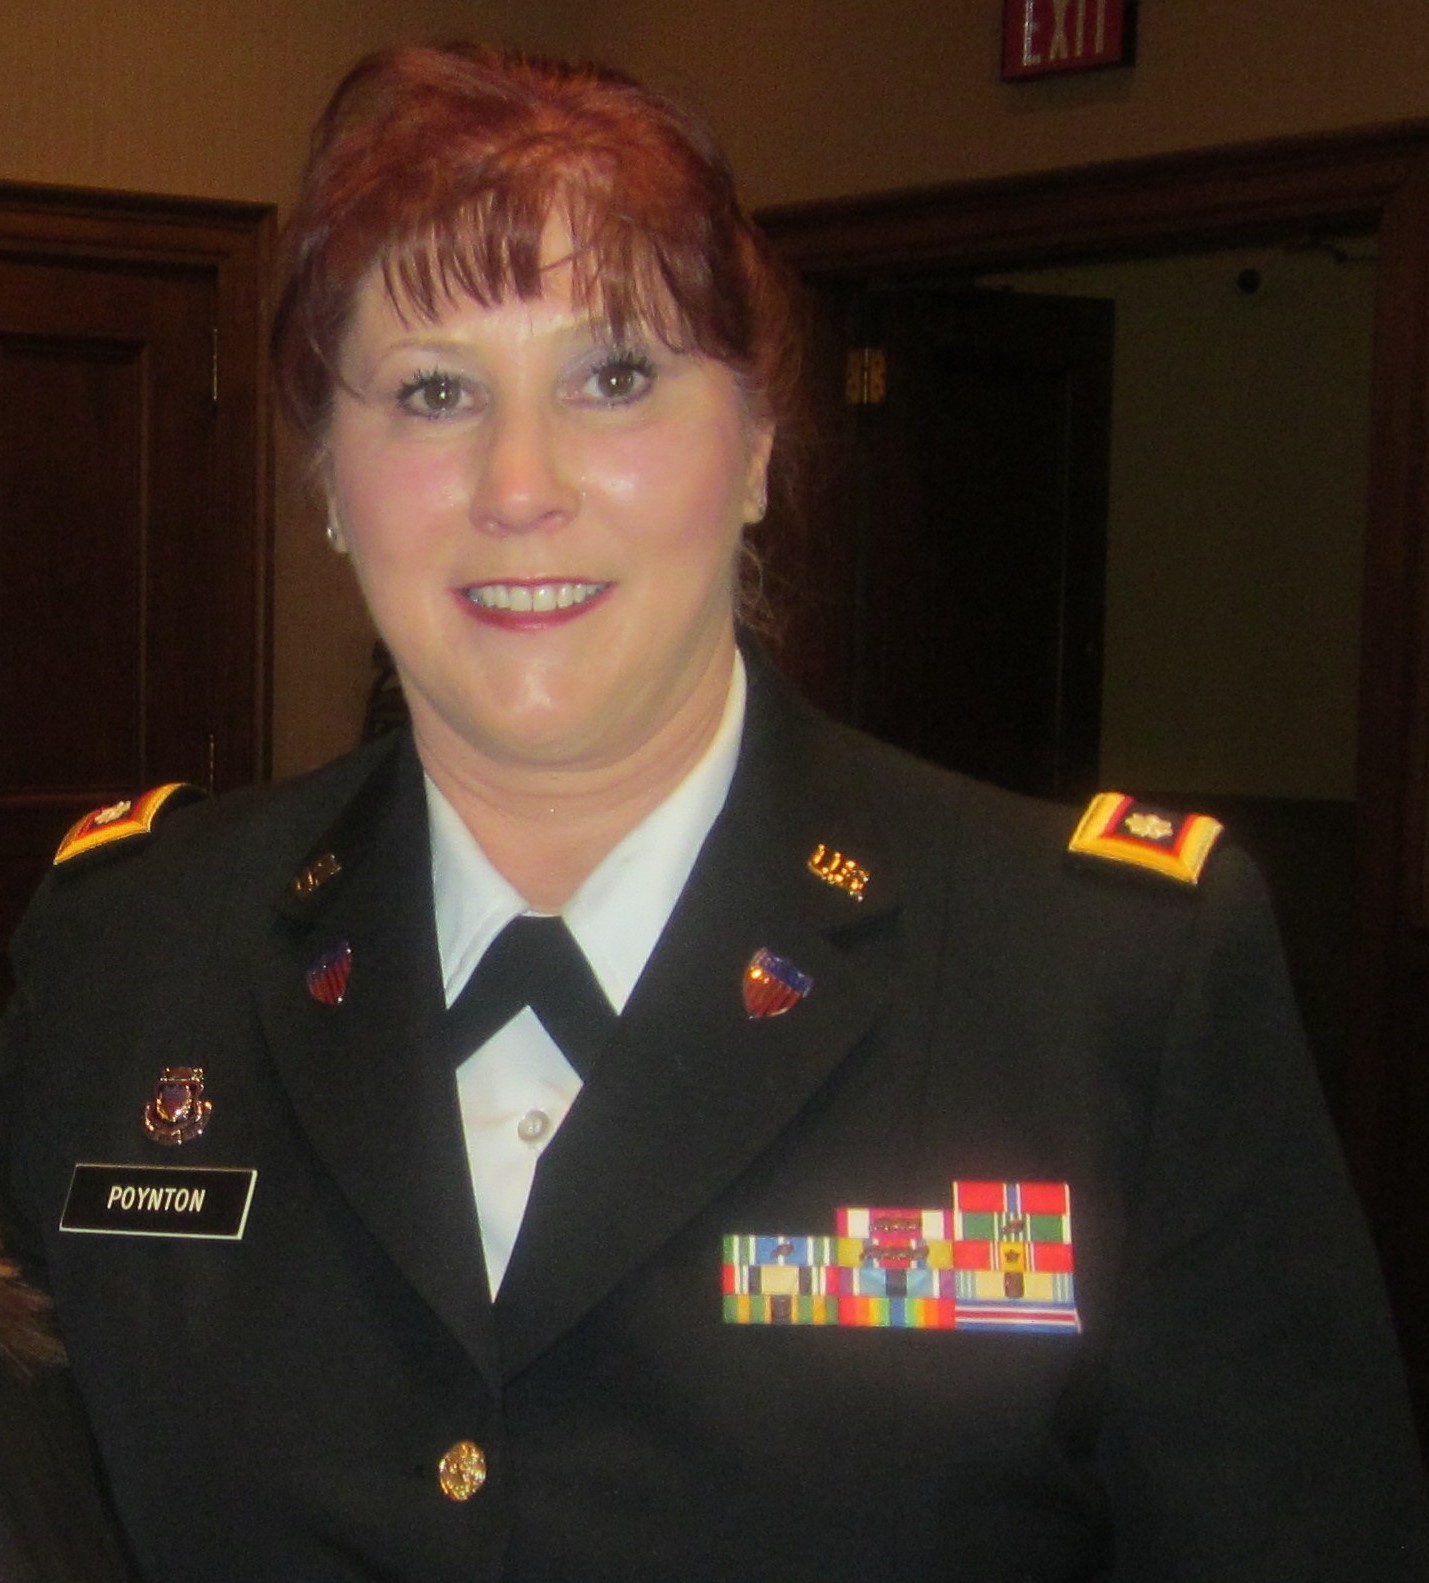 Lieutenant Colonel (Ret) Kathryn Poynton: 

Kath has over 32 years of military service in staff positions for the National Guard Bureau and U.S. Army. She has received numerous awards during her service to include: Bronze Star, Legion of Merit, Meritorious Service Medal (5), Army Commendation Medal (3), Army Achievement Medal (2), Iraqi Campaign medal, Office of Secretary of Defense staff Badge and Department of the Army staff badge. Kathy also served as the National Director of Event Operations and Specialty Events for "Hiring our Heroes"; she developed initiatives and communications strategies to assist transitioning service members, and veterans for find meaningful employment.